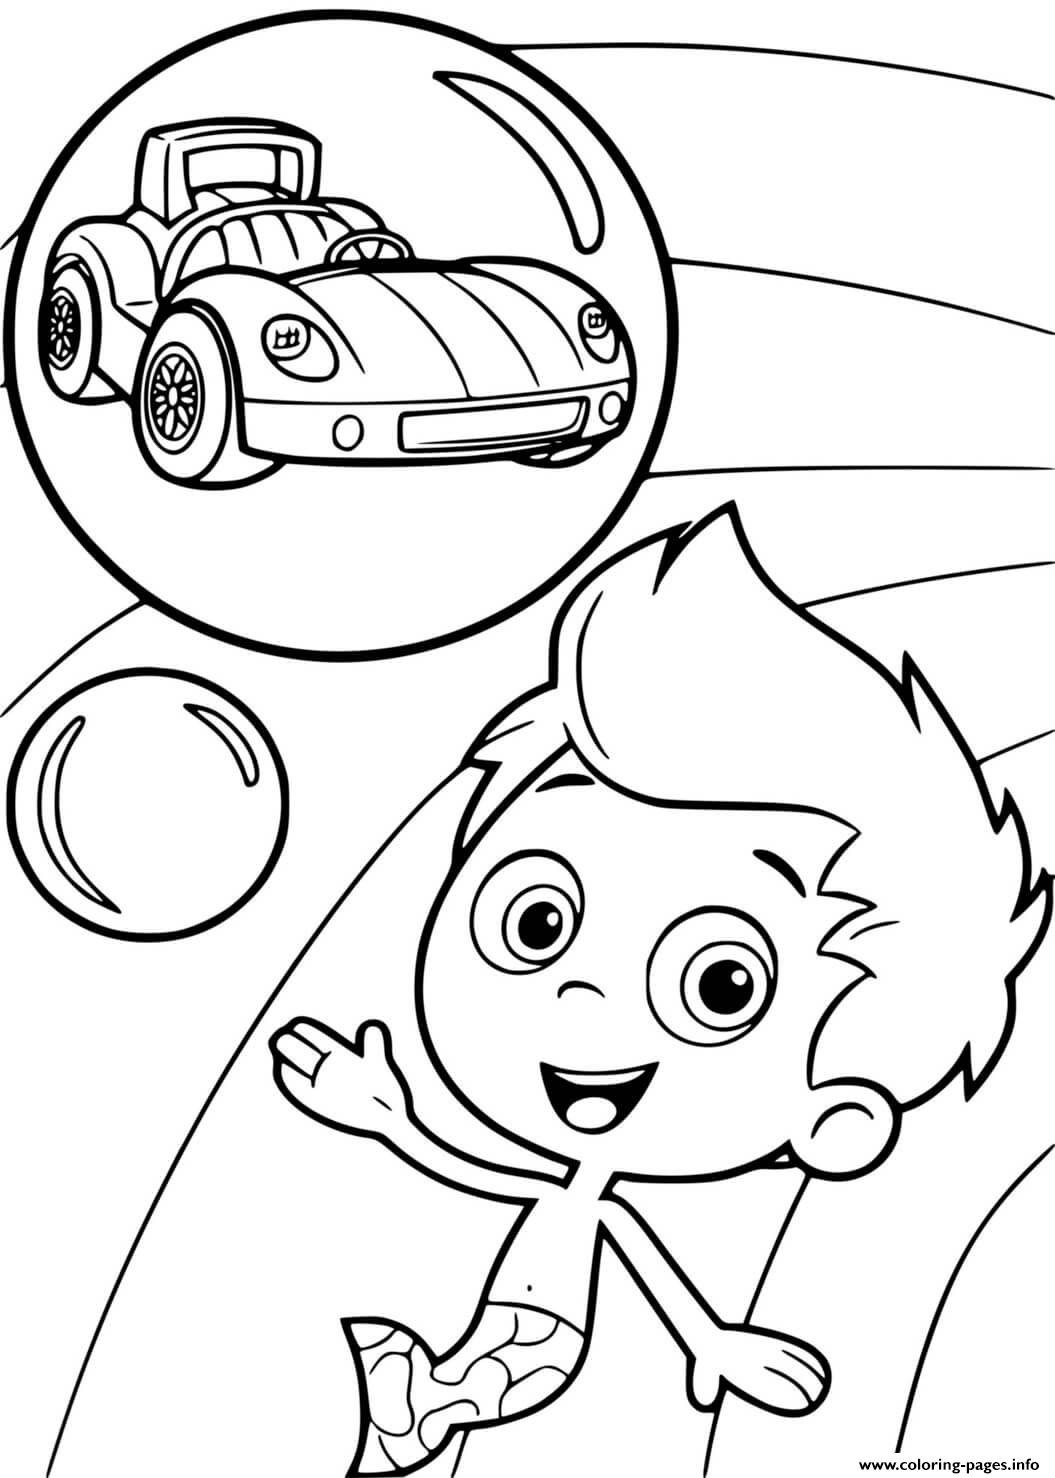 Gil Want To Have A Car In Bubble Guppies coloring